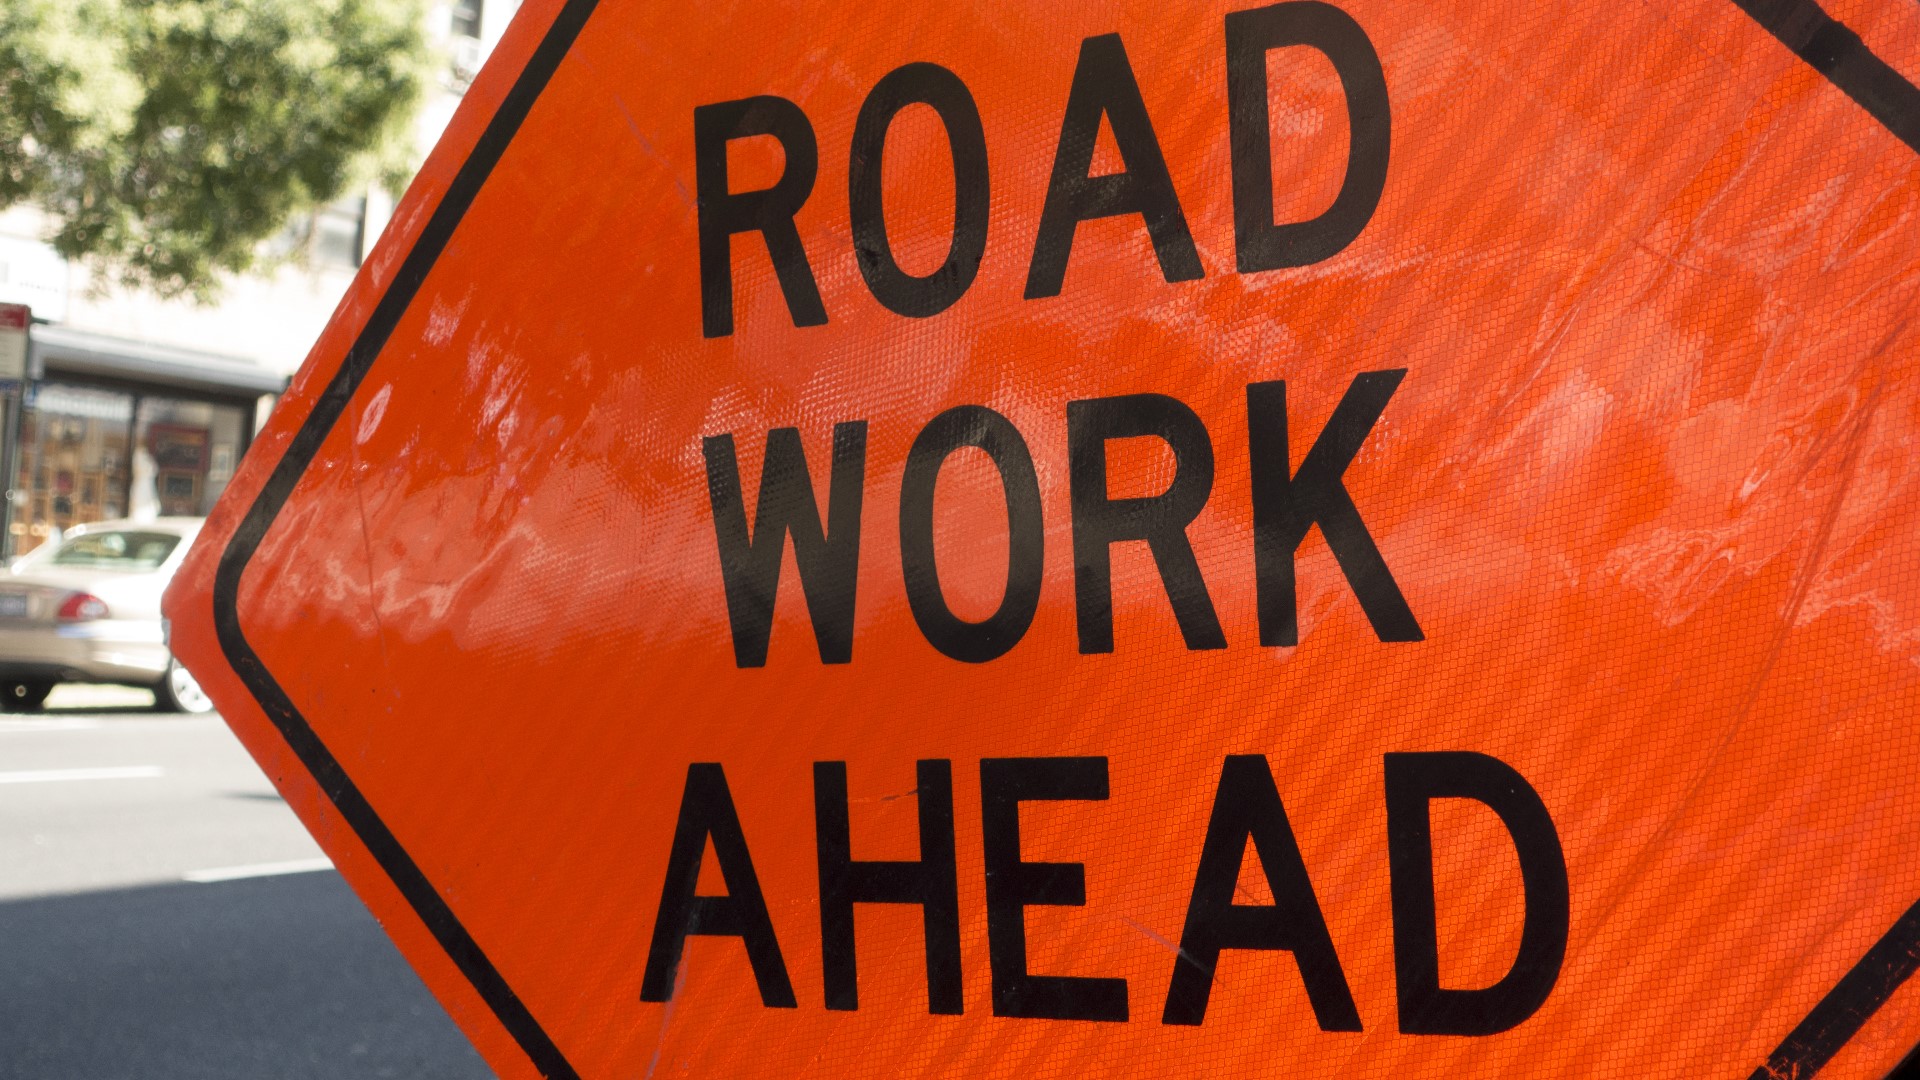 St. Charles drivers could experience longer commutes this week as MoDOT closes lanes on two major interstates. It's in preparation to widen I-70 to three lanes.